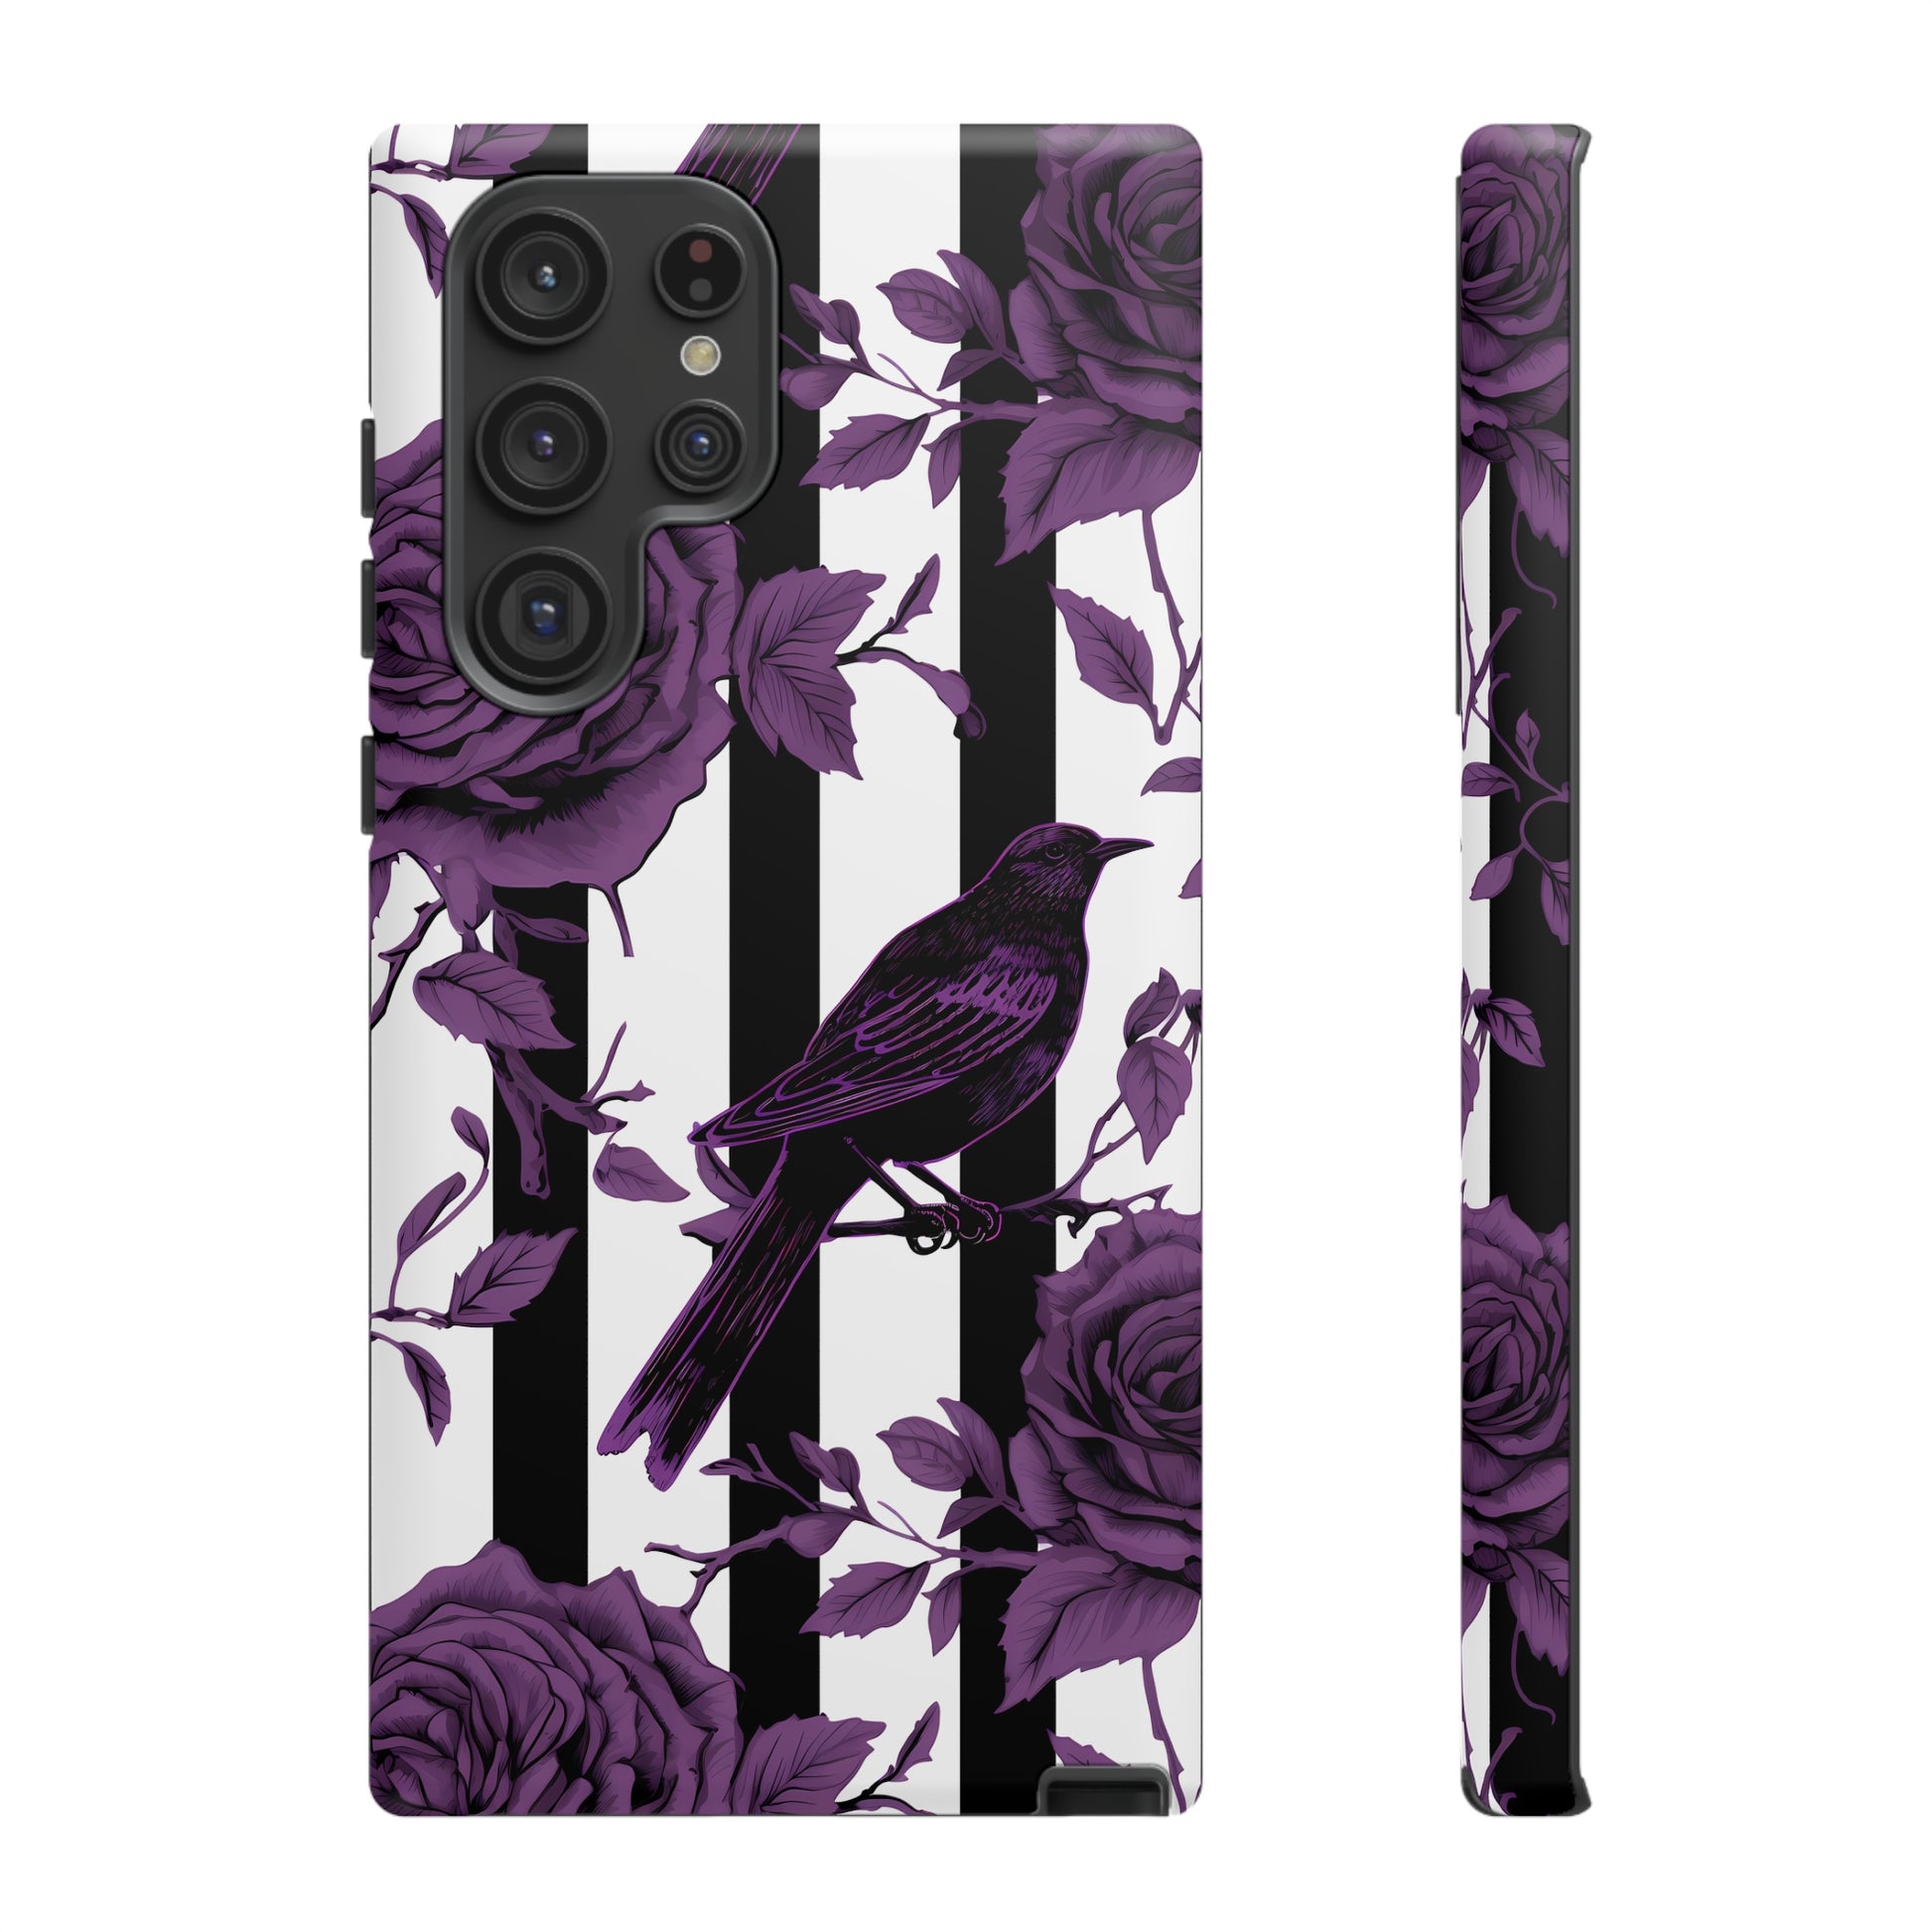 Striped Crows and Roses Tough Cases for iPhone Samsung Google PhonesPhone CaseVTZdesignsSamsung Galaxy S22 UltraMatteAccessoriescrowsGlossy